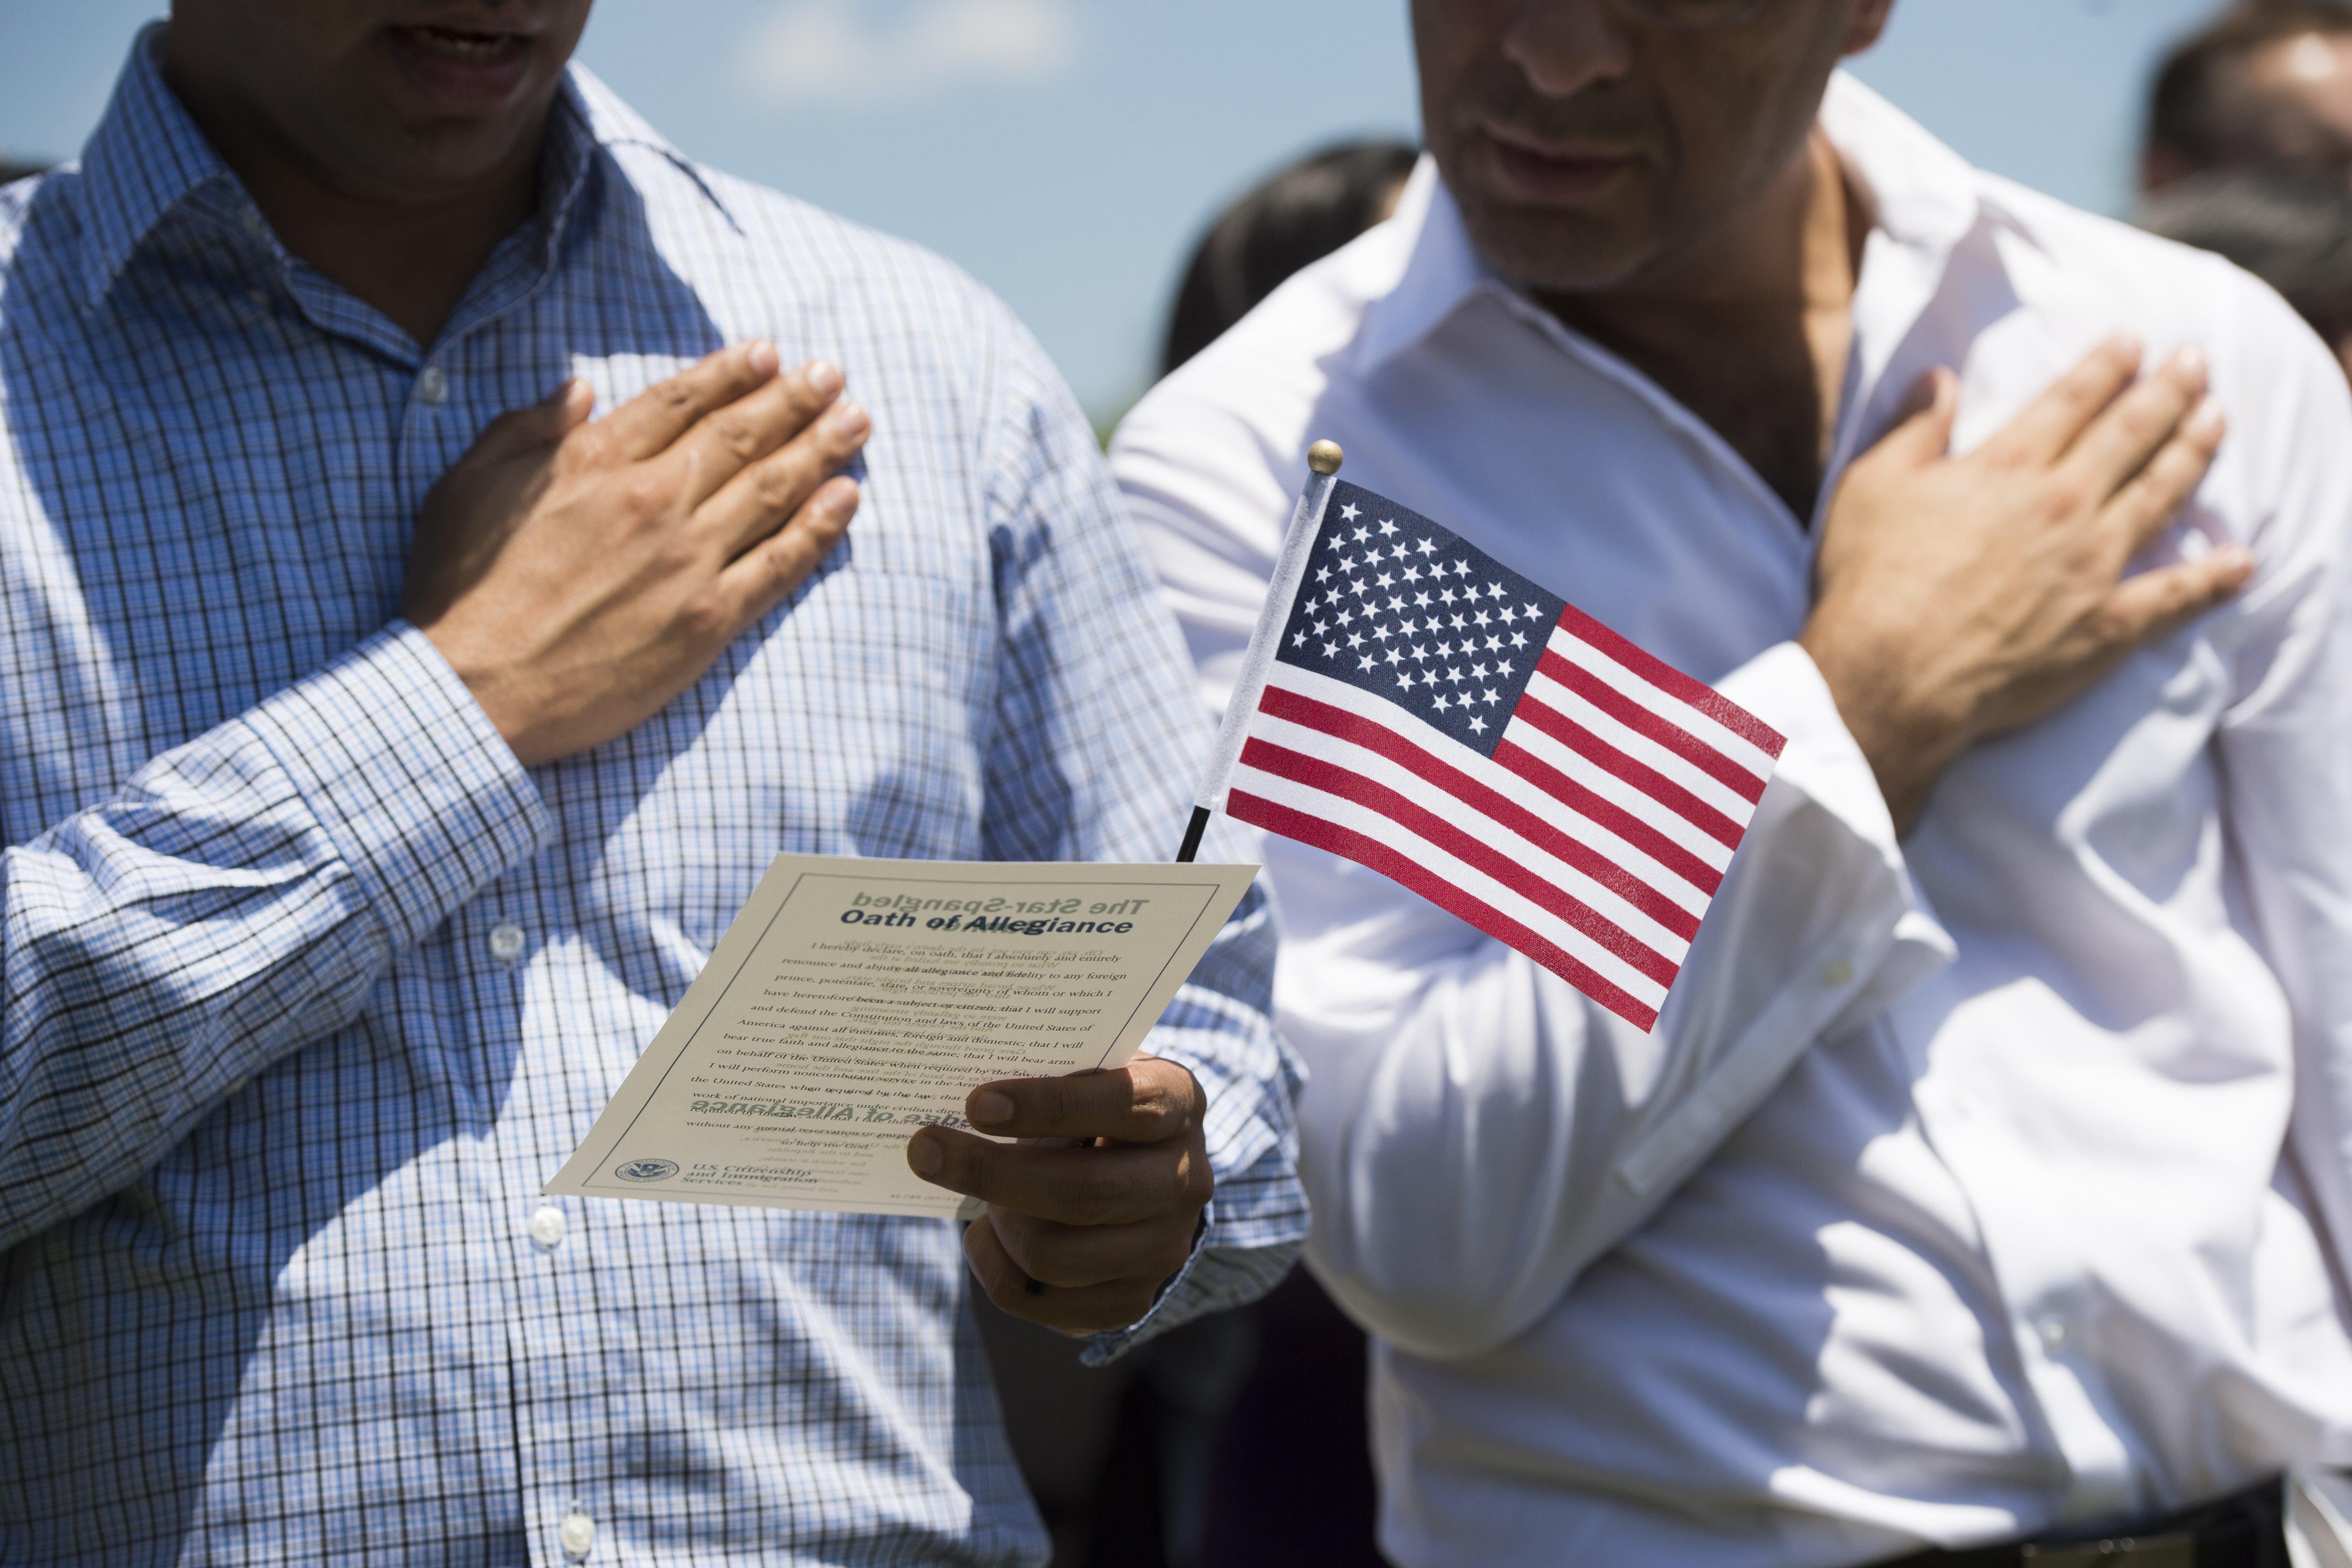 Newly sworn-in U.S. citizens recite the Pledge of Allegiance during a 2017 naturalization ceremony at Mount Vernon, Virginia.